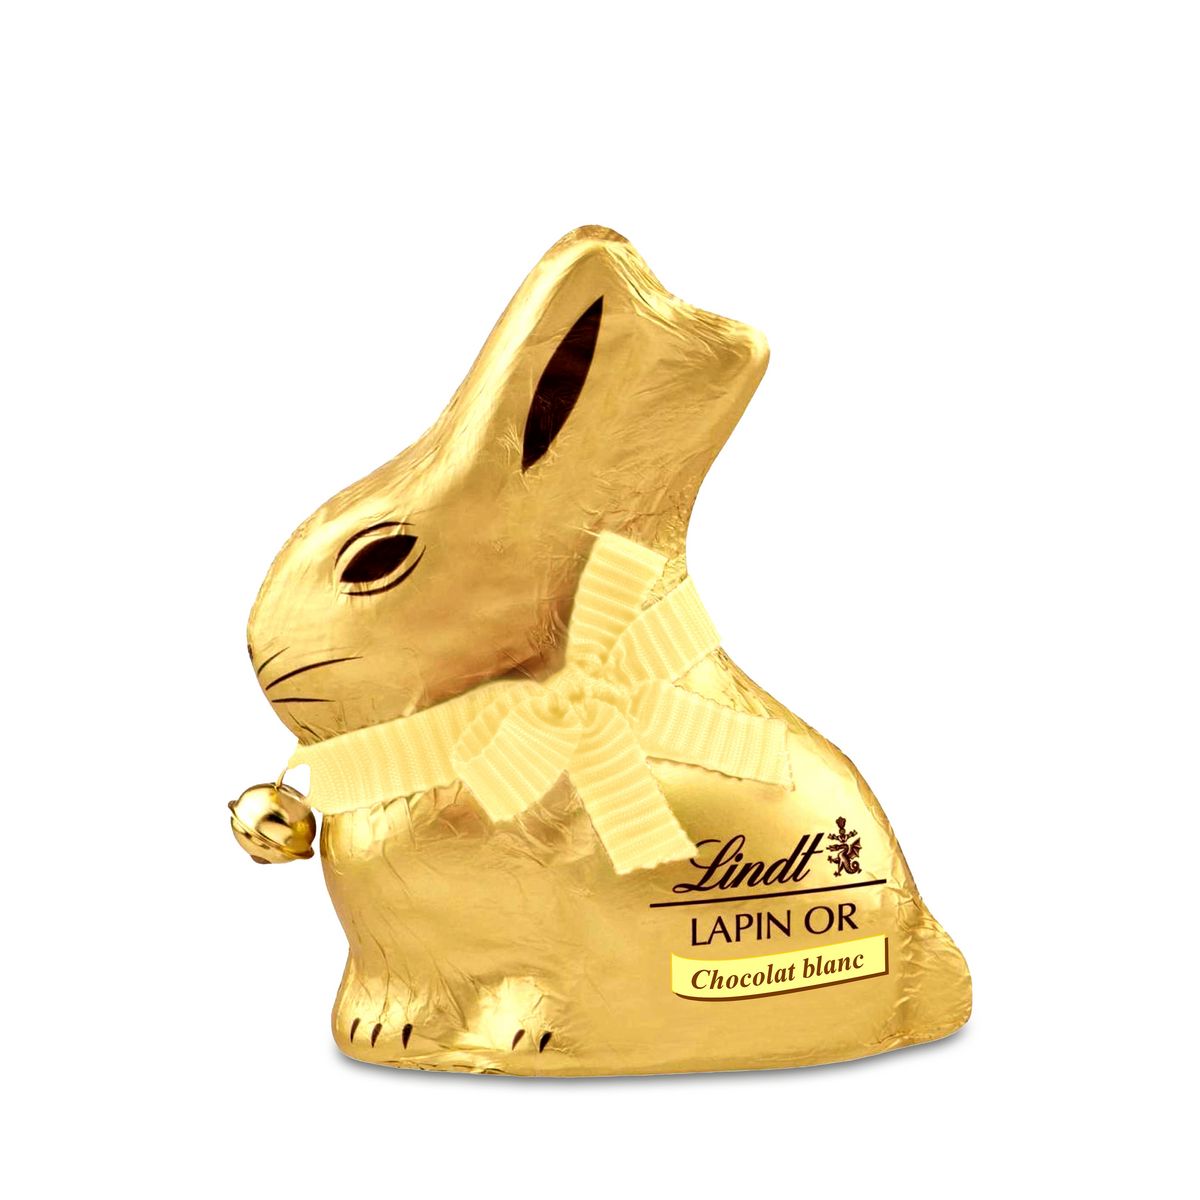 LINDT Lapin Or moulage chocolat blanc 1 pièce 200g